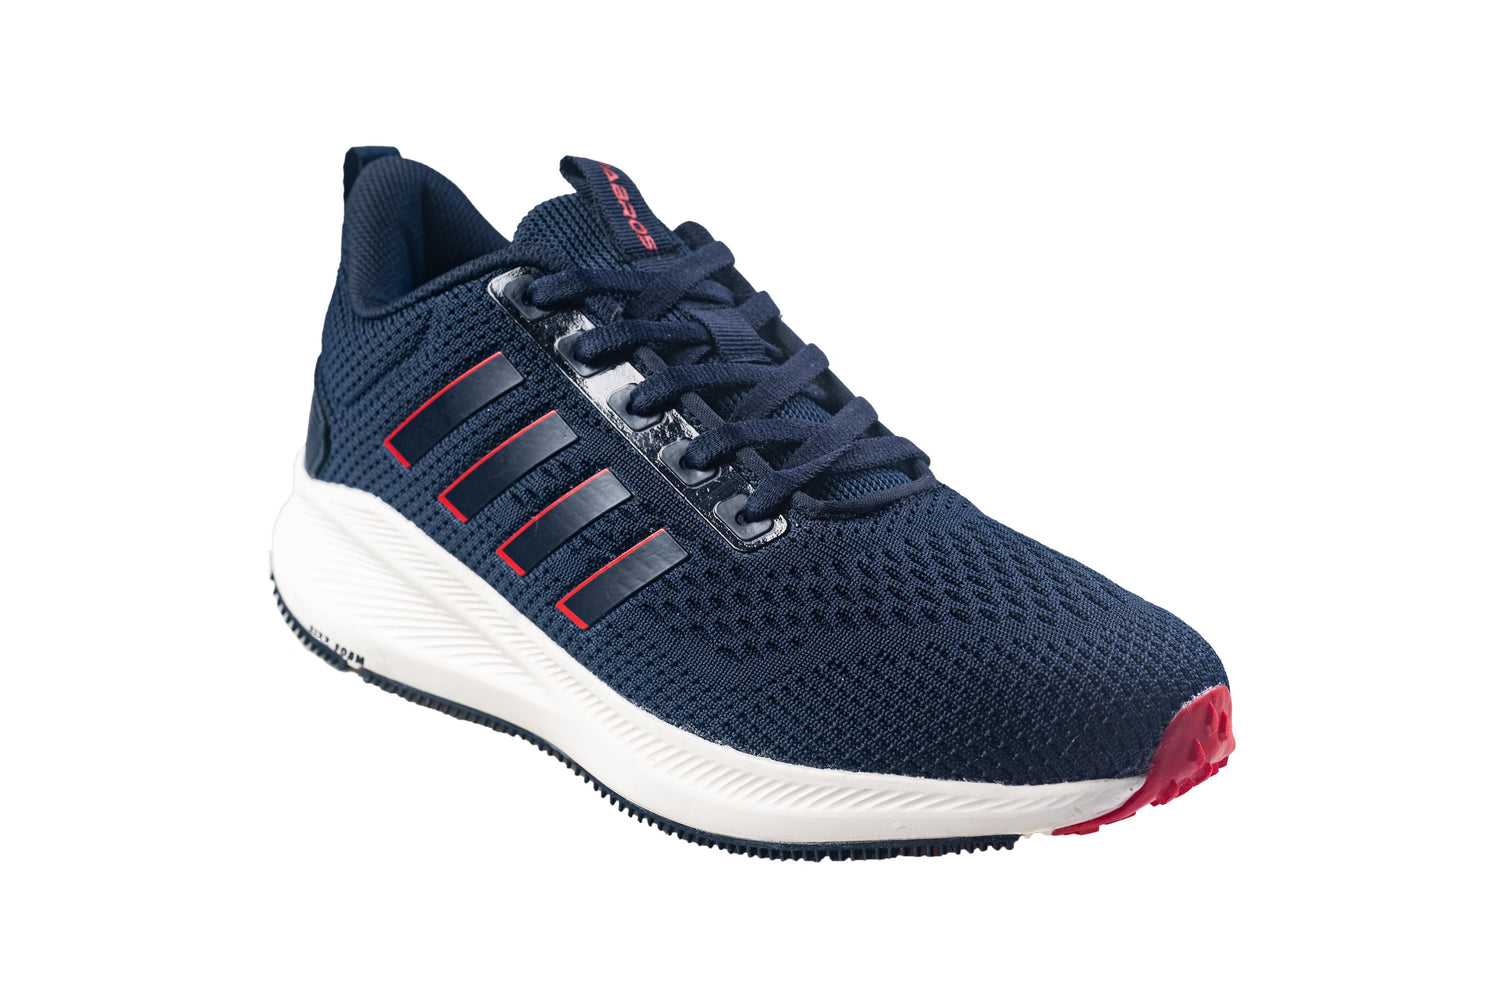 Abros Gents Navy / Red Sports Shoe